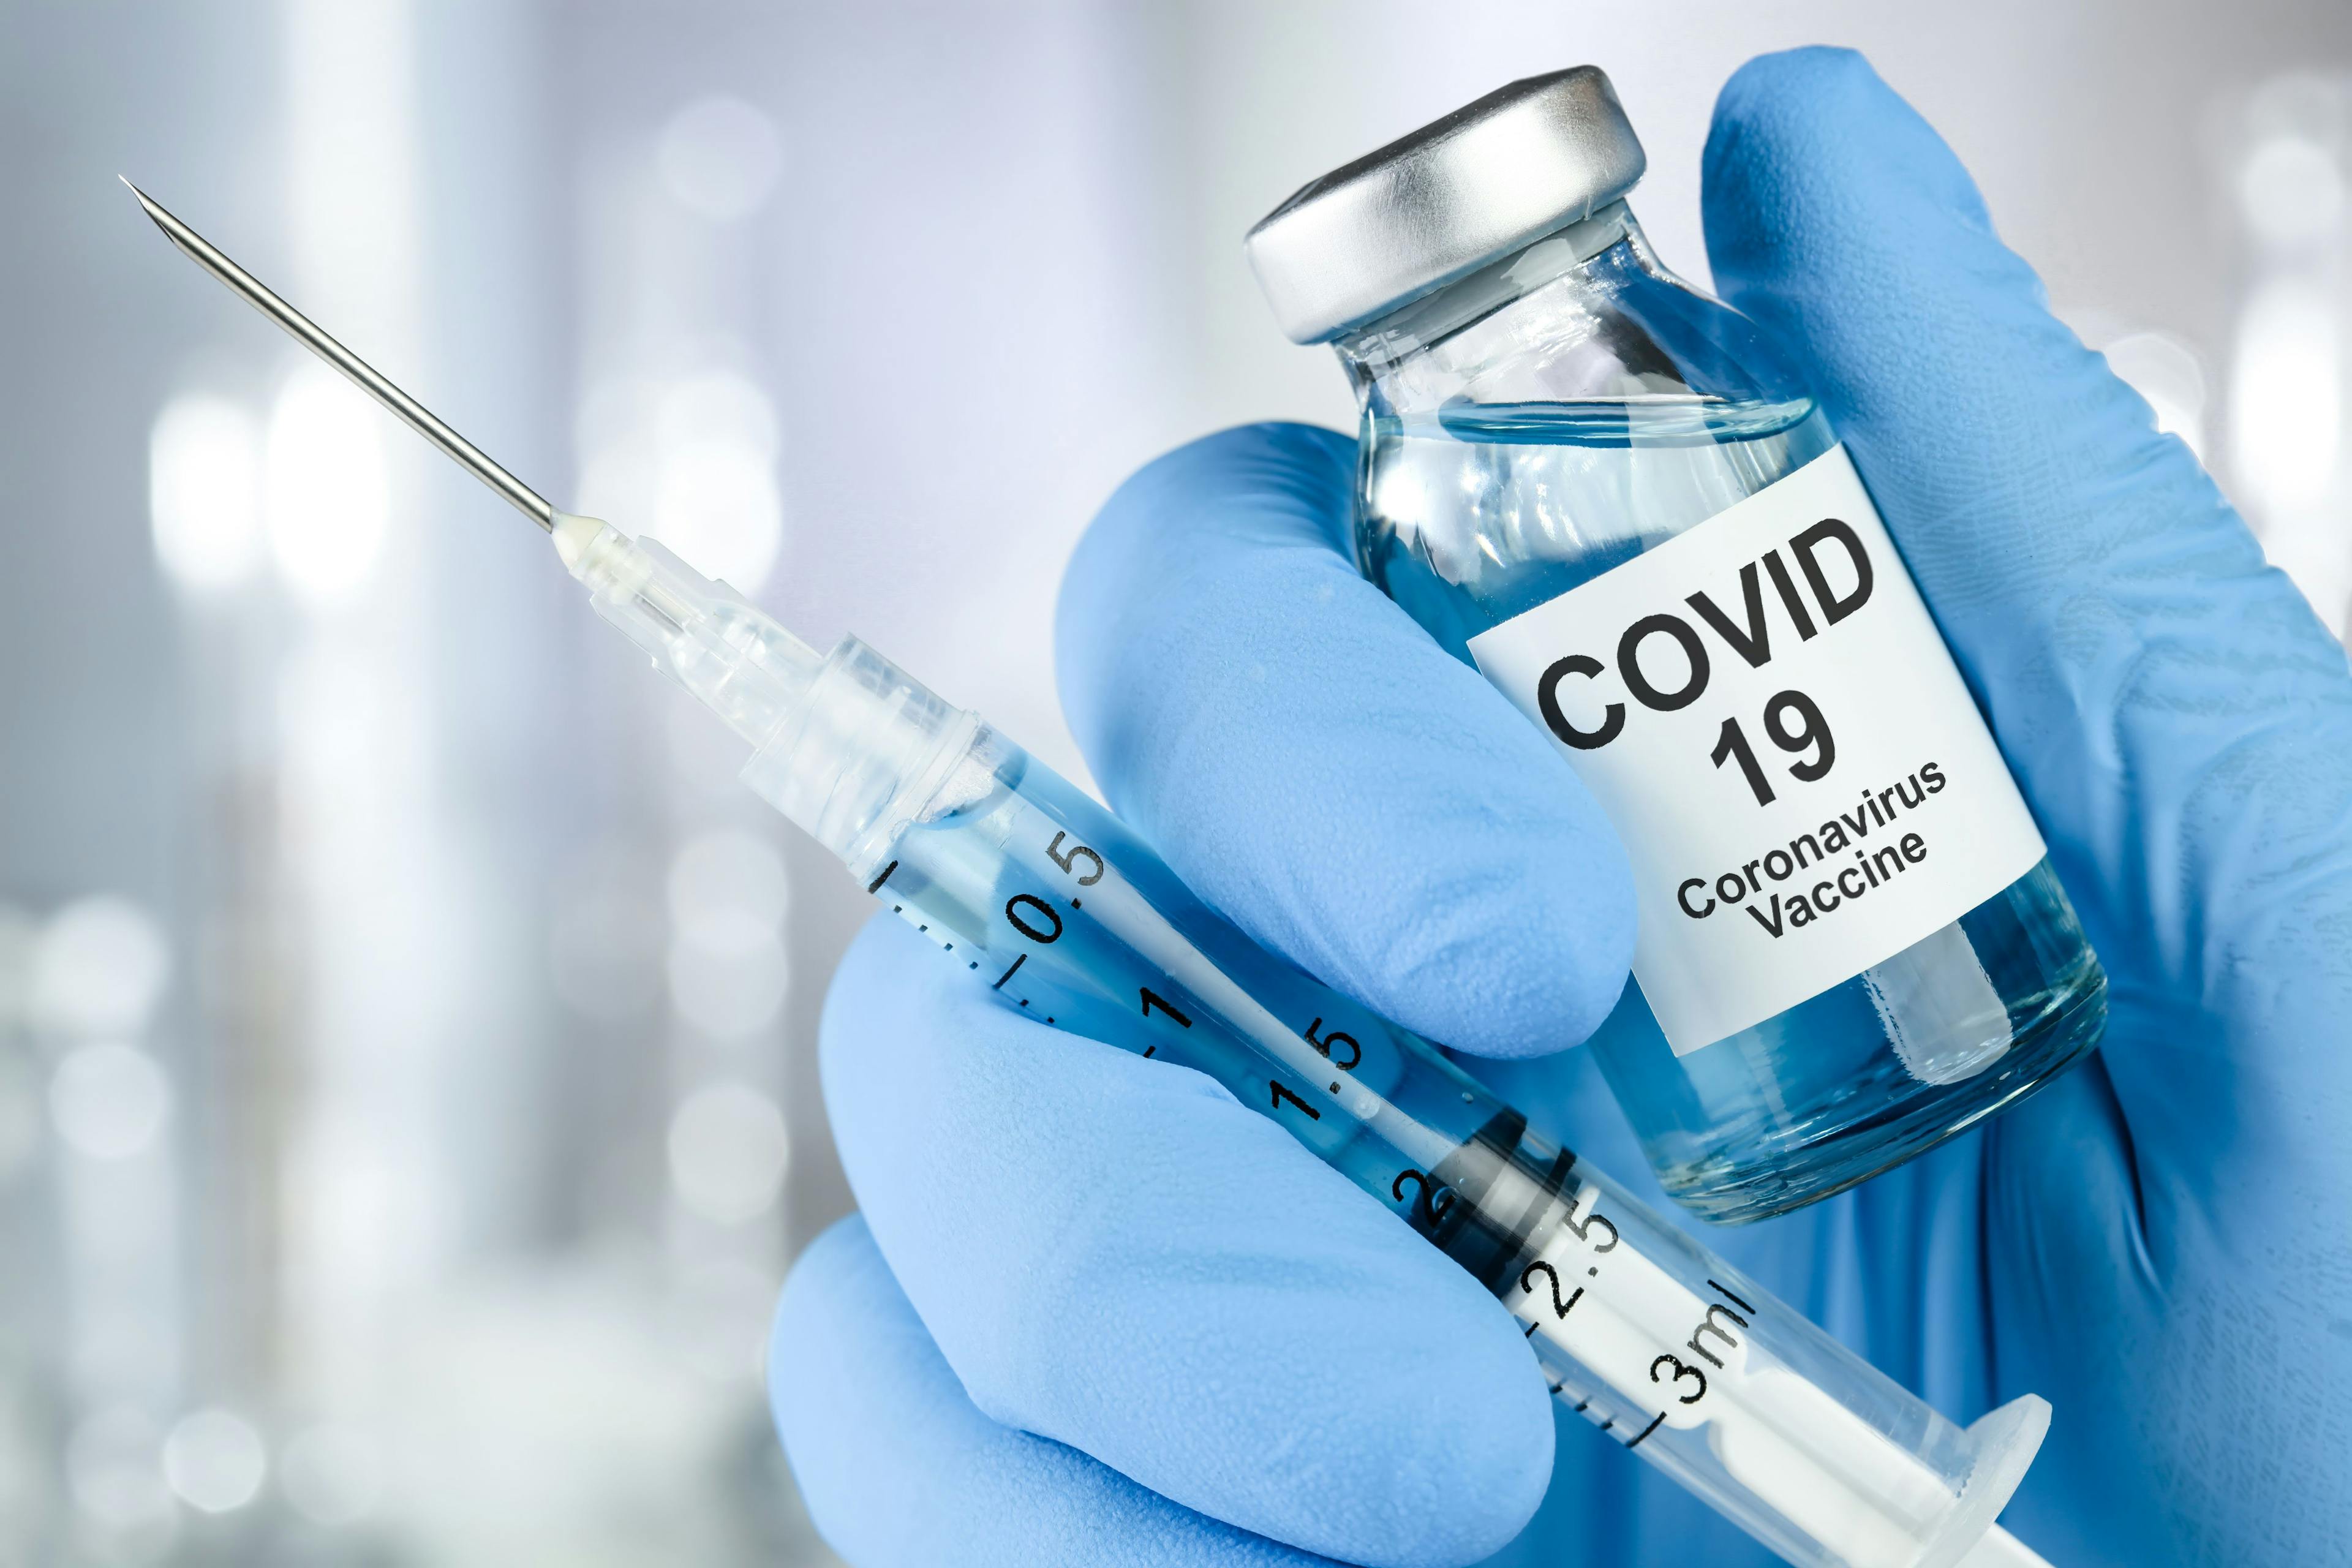 Clinician Holding COVID-19 Vaccine Bottle and Syringe | image credit: Leigh Prather - stock.adobe.com